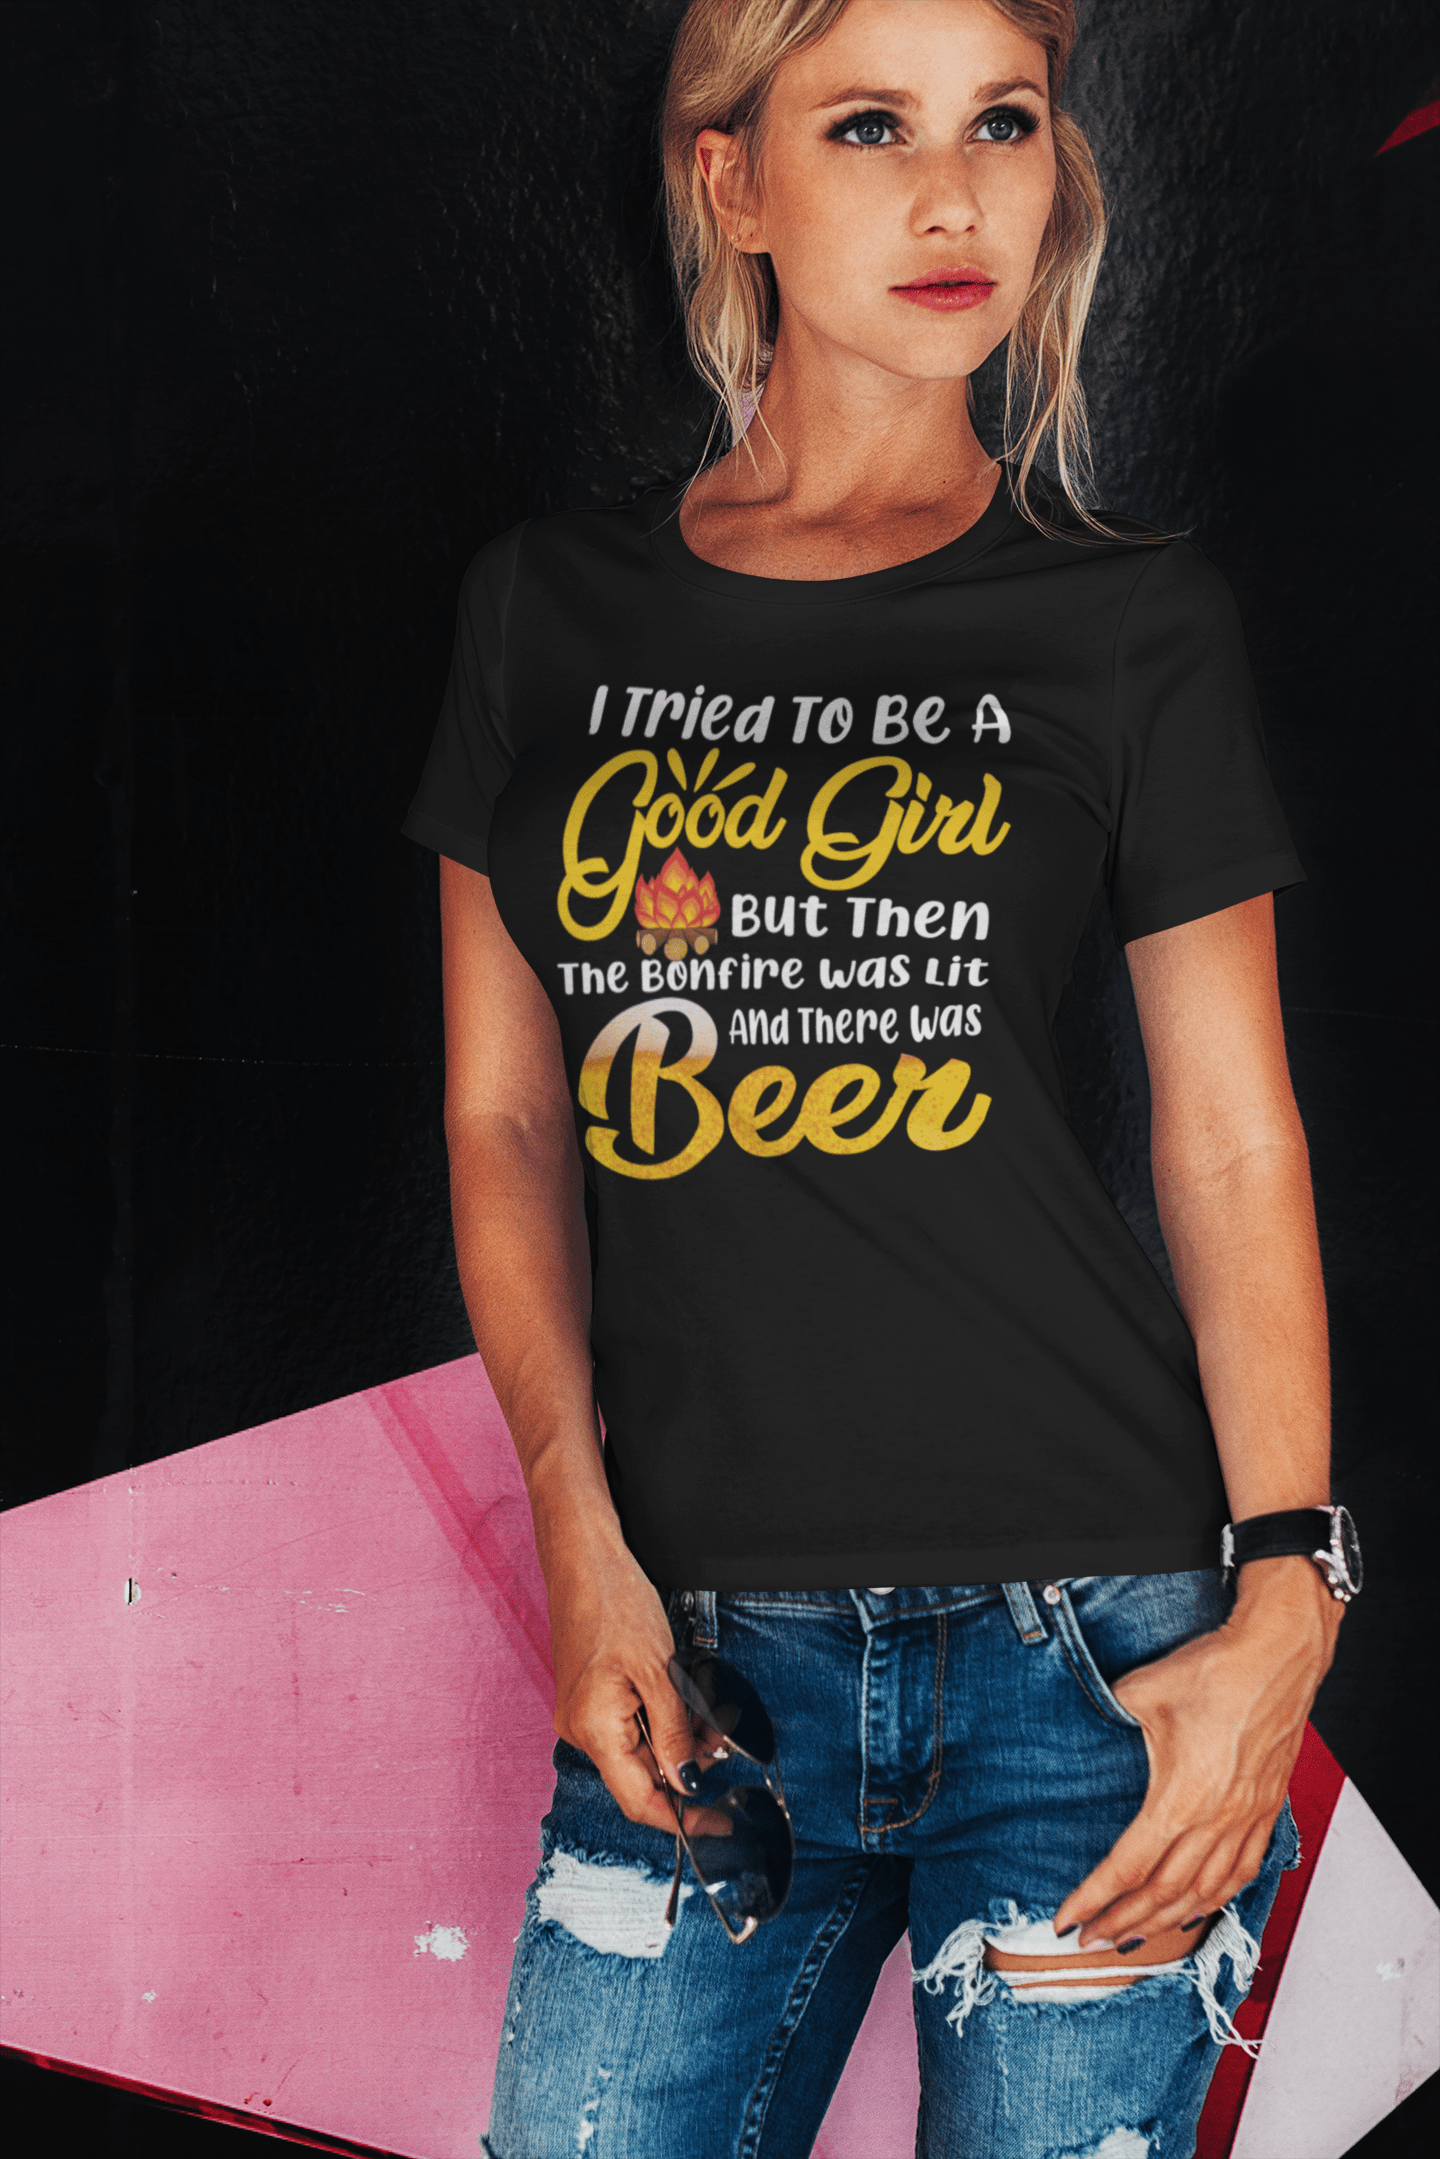 ULTRABASIC Women's Organic T-Shirt I Tried to be a Good Girl but Then the Bonfire Was Lit and There Was Beer - Beer Lover Tee Shirt